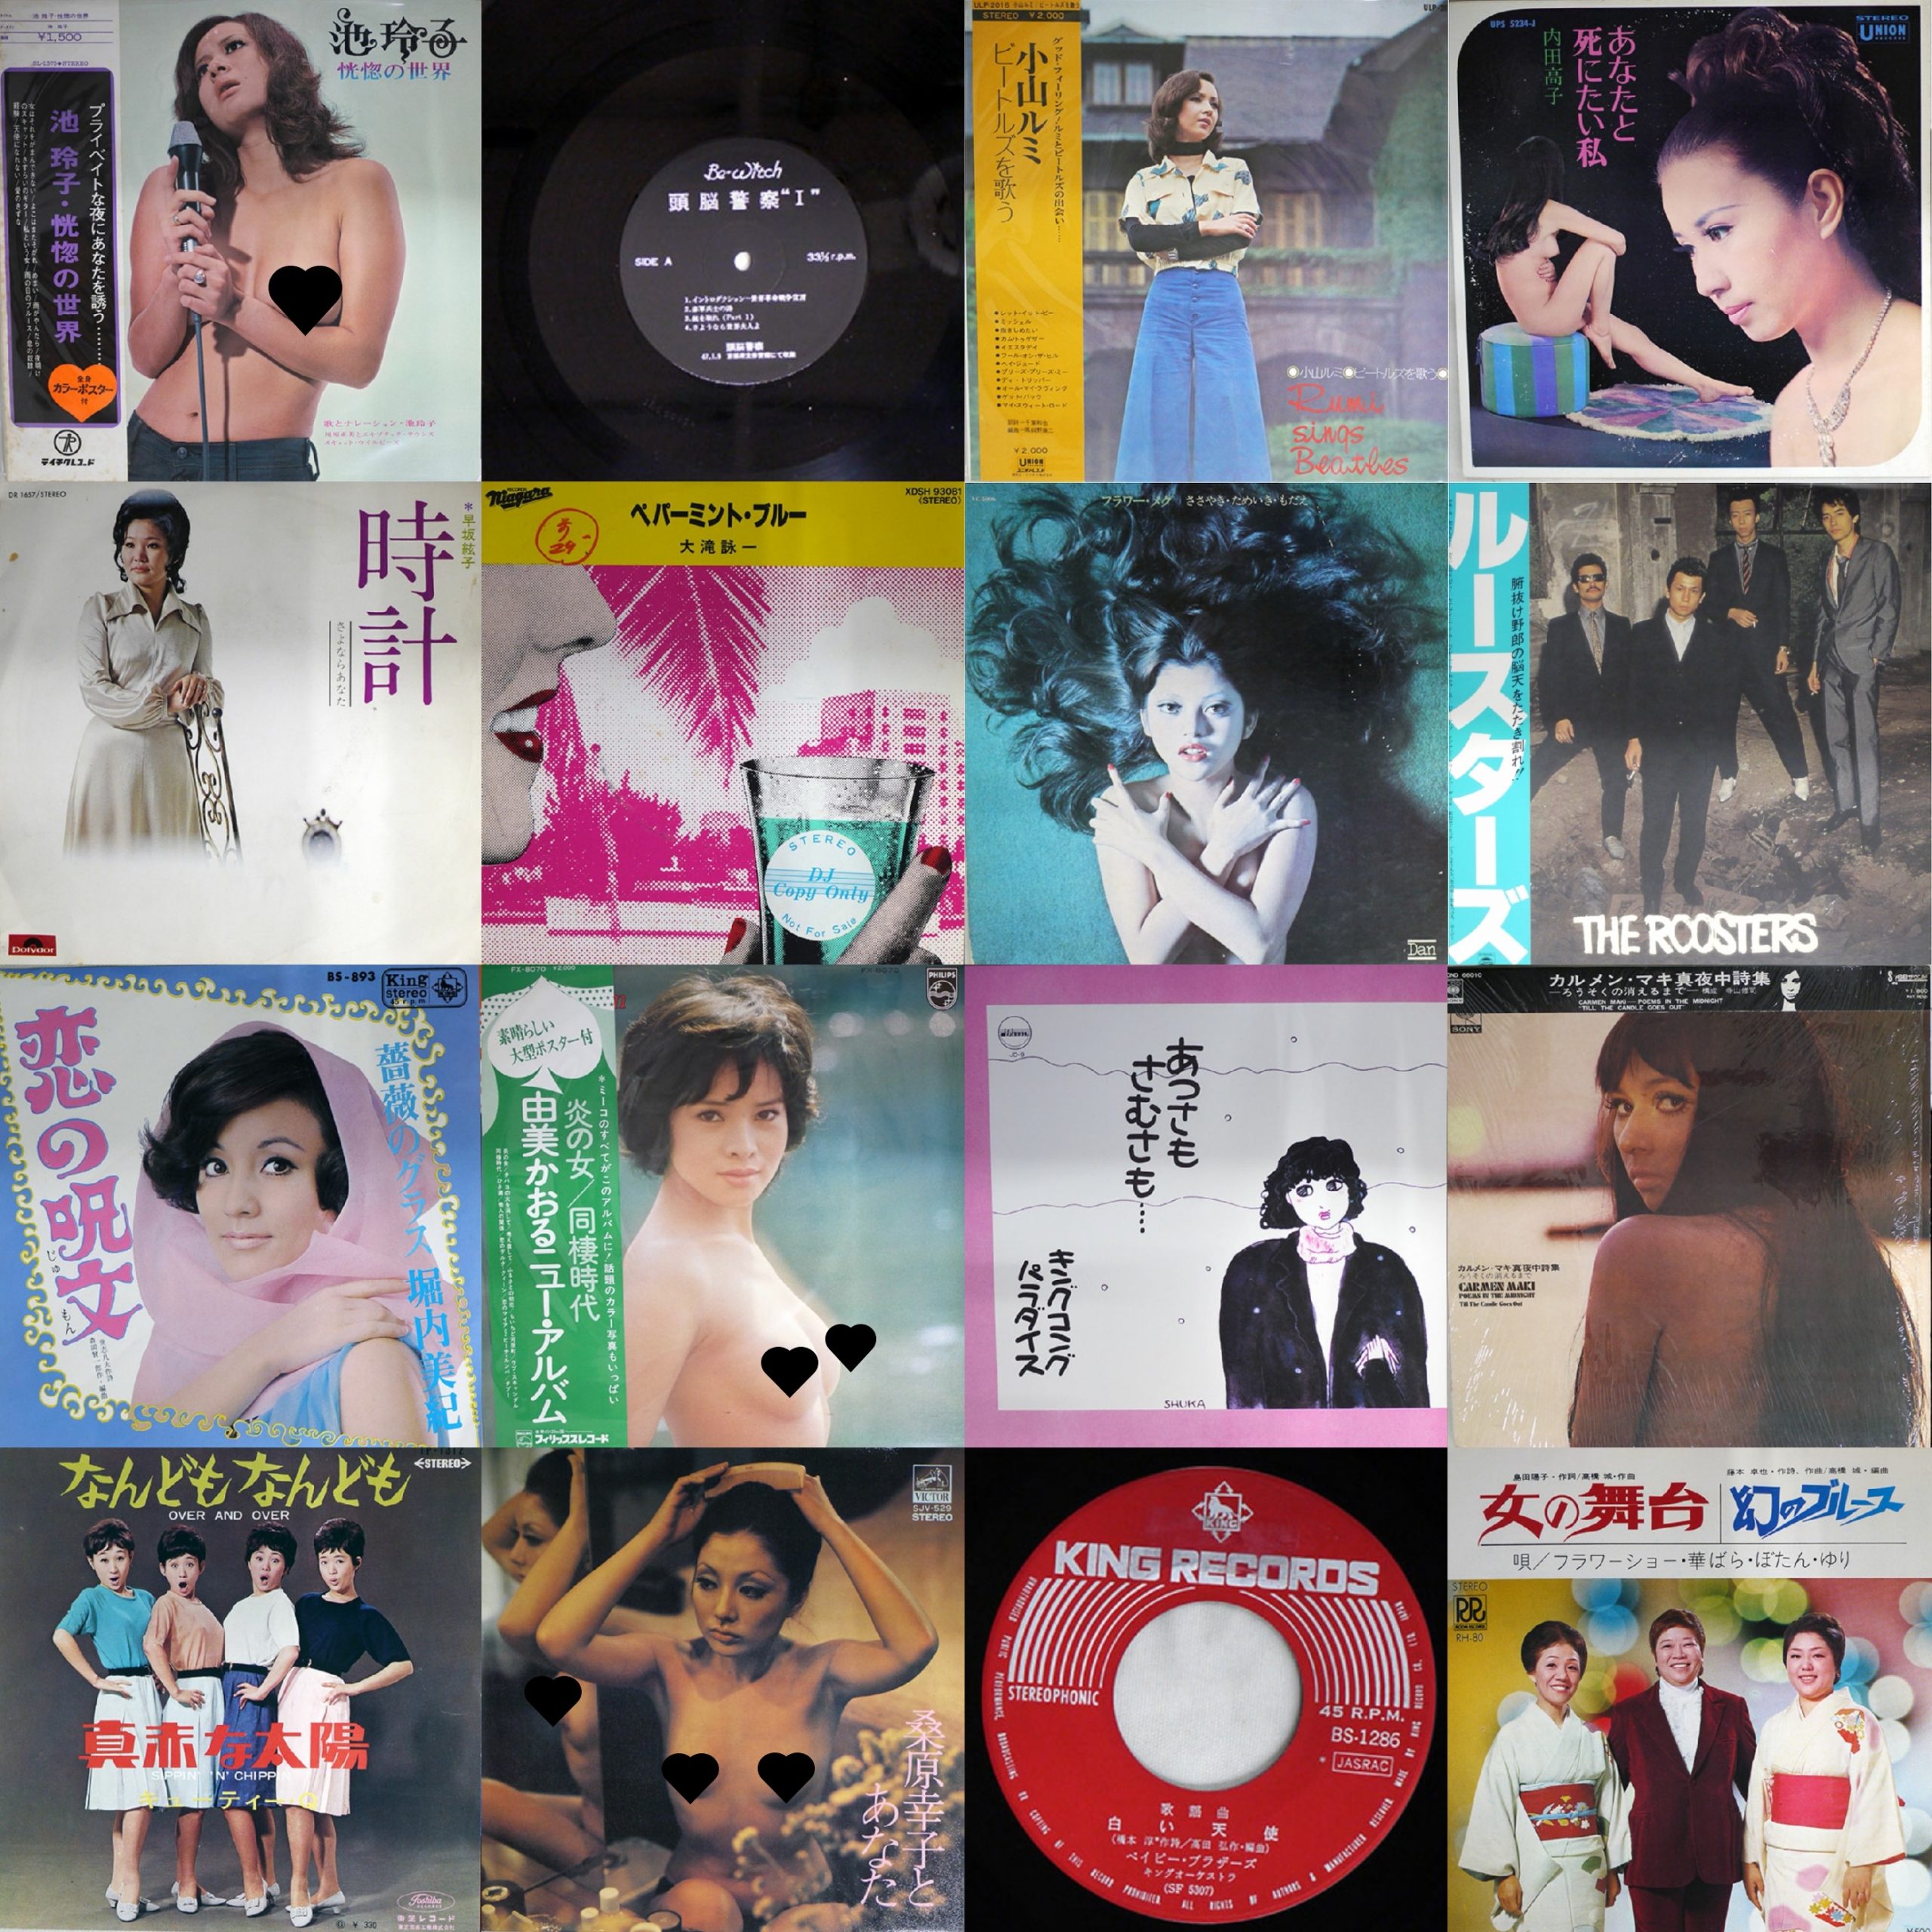 2022/07/20(WED) プレミアム和モノLP&7INCH SALE – General Record Store